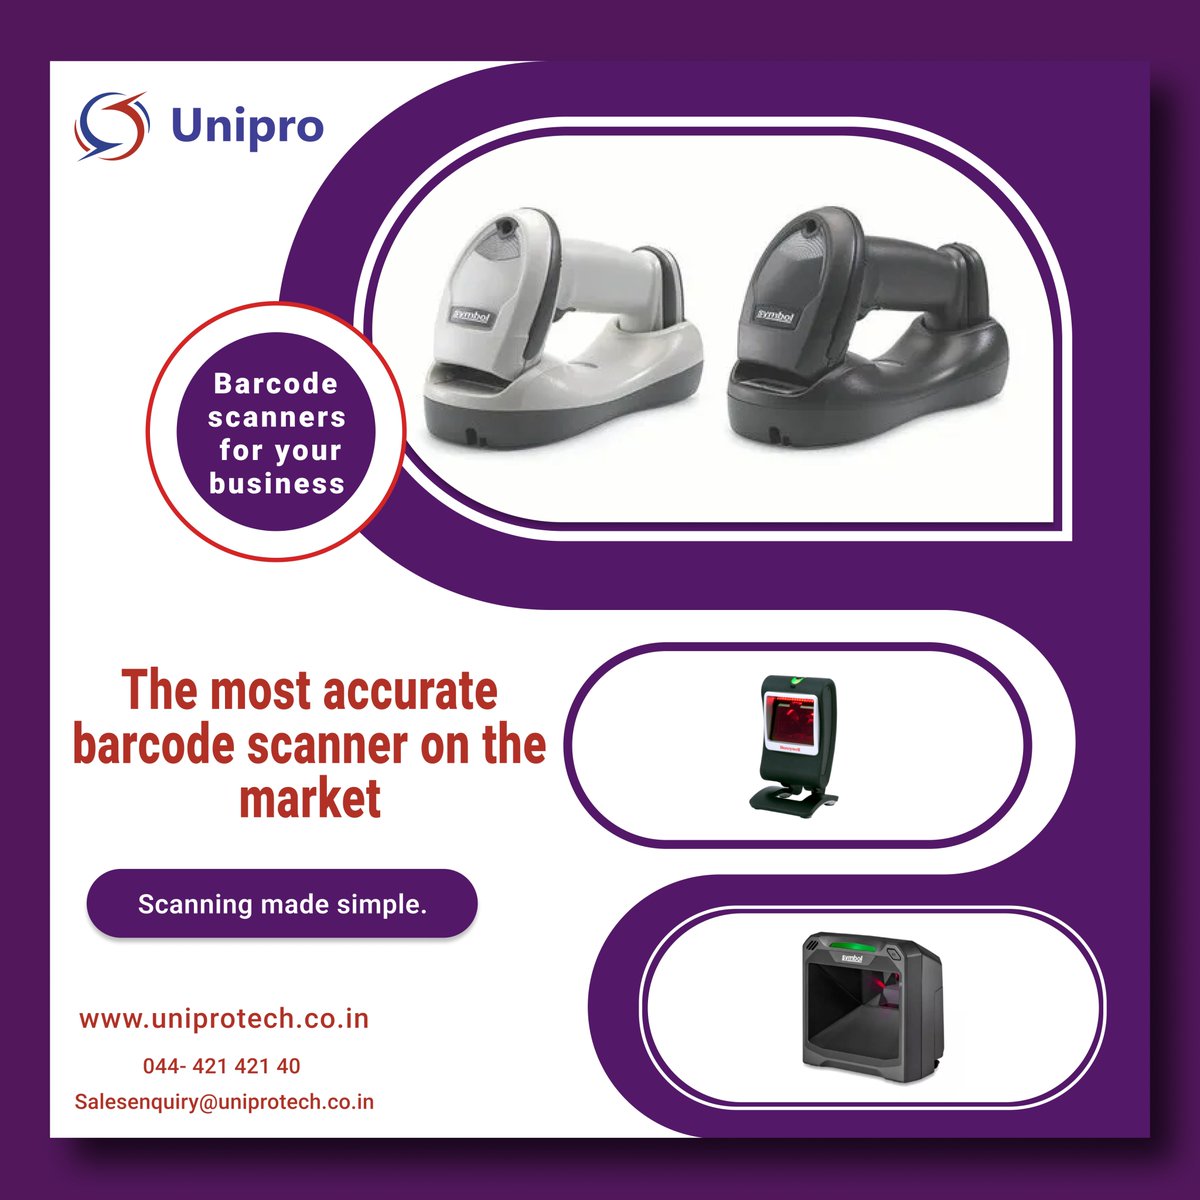 Boost Efficiency and Accuracy with Unipro's Barcode Scanner! 🌟
Tired of manual data entry errors and slow processes? Unipro Barcode Scanner is here to revolutionize your business operations! #handheldbarcodescanner
#industrialbarcodescanner #mobilebarcodescanner #wirelessbarcode